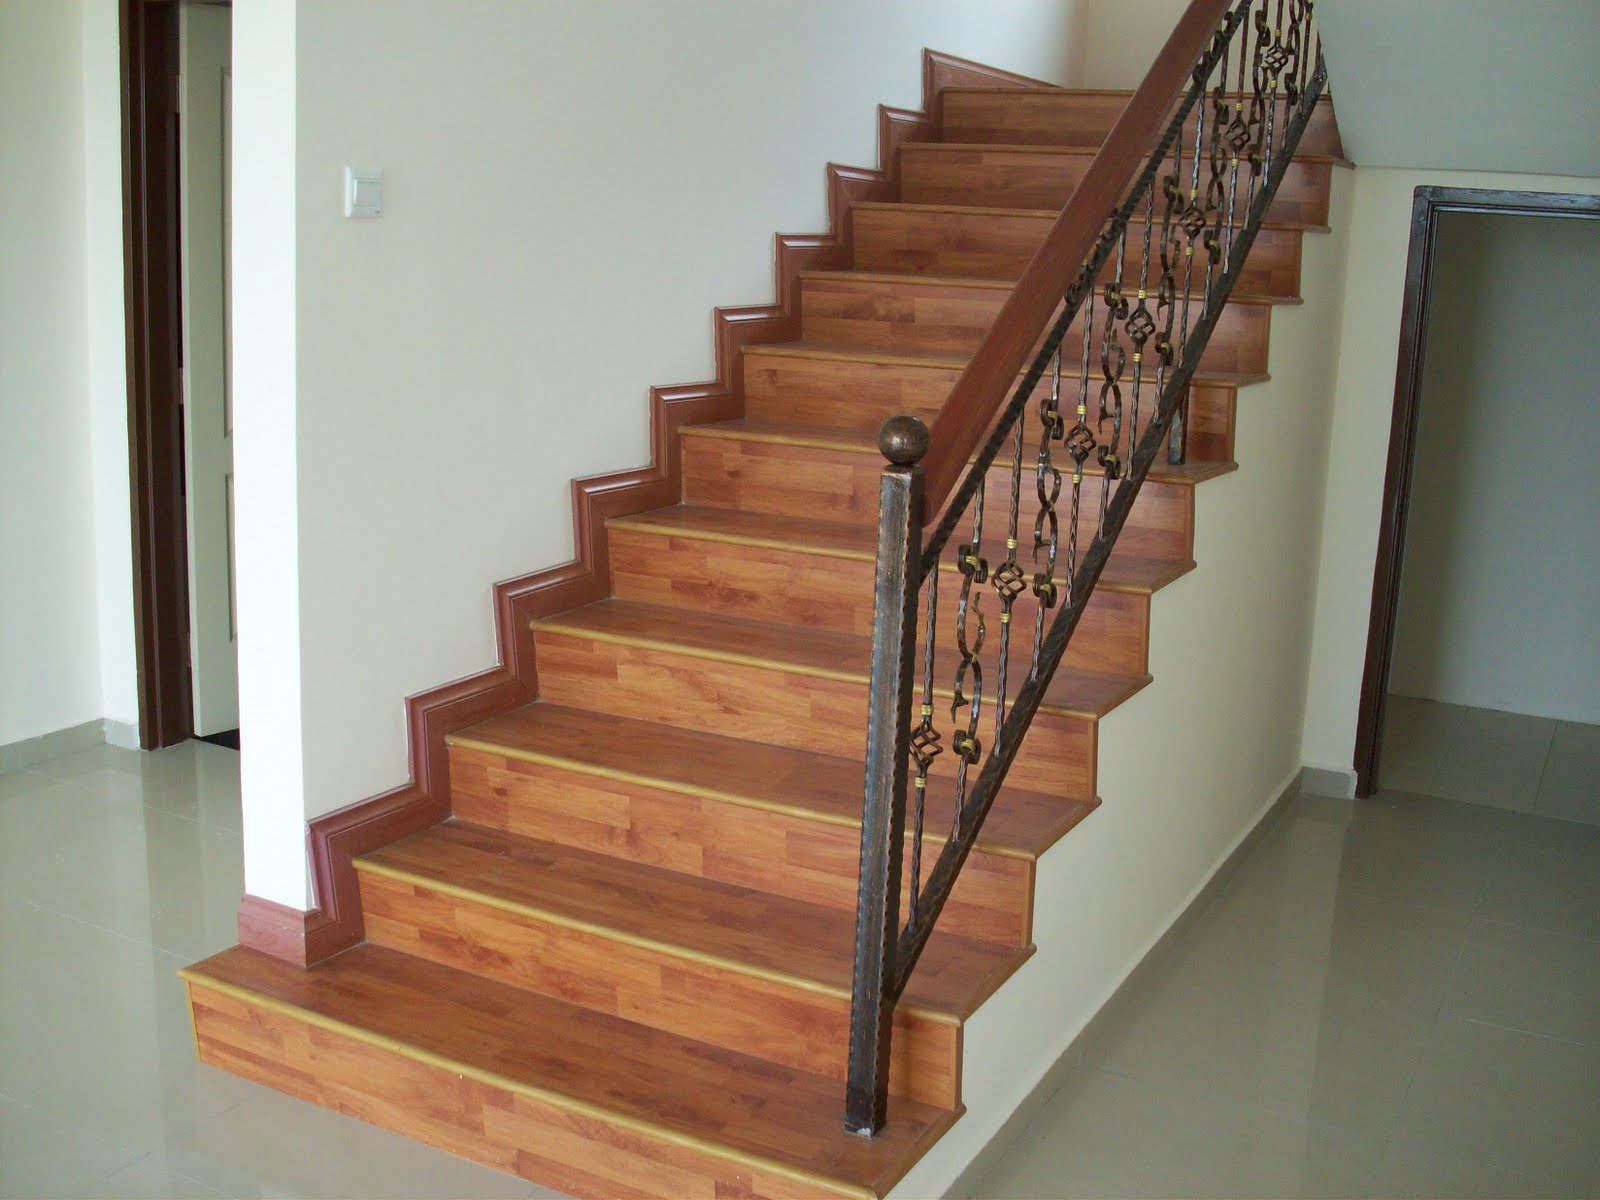 How To Install Wood Flooring On Stairs, How To Put Wood Flooring On Stairs